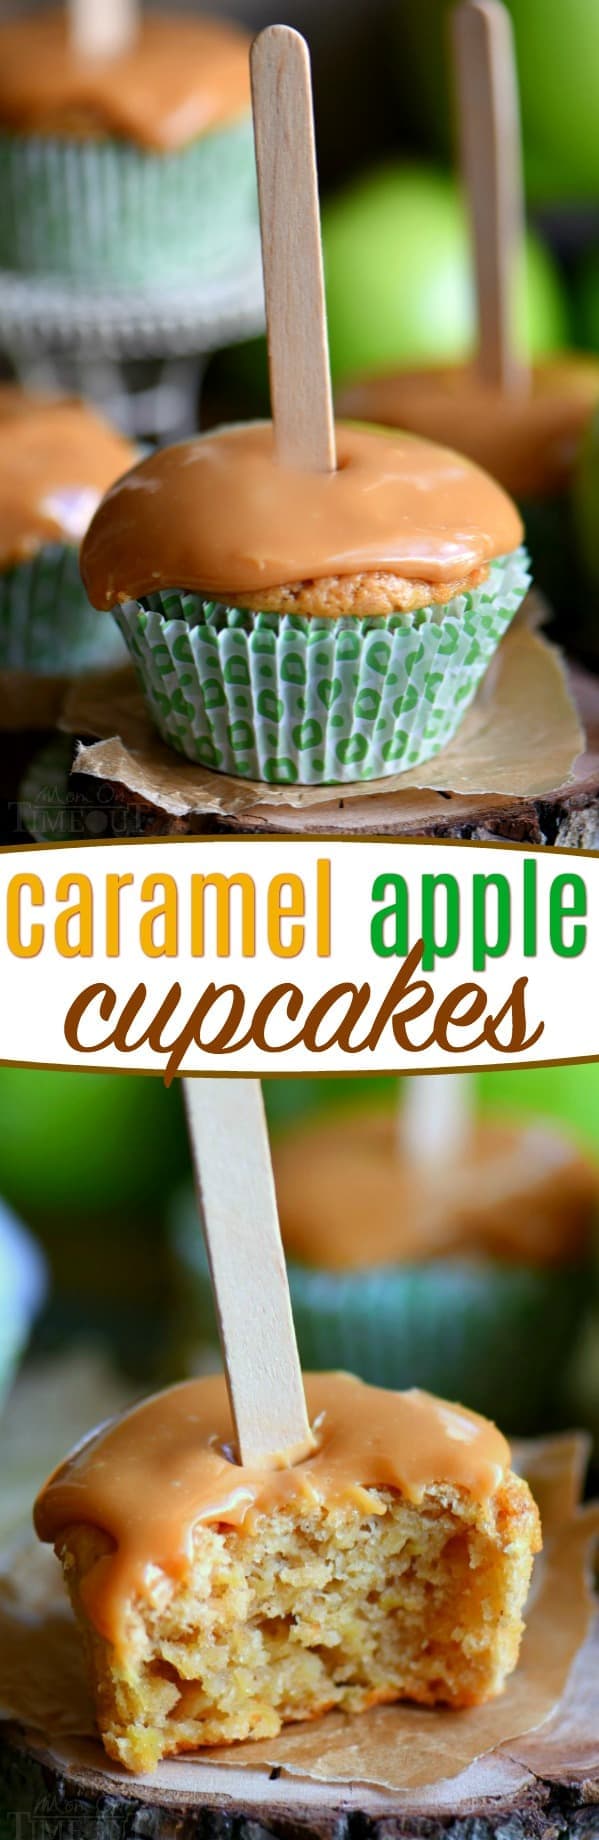 There is no better way to usher in fall than with these delicious Caramel Apple Cupcakes. Moist cupcakes loaded with apples and applesauce for double the apple flavor. A decadent caramel frosting tops them off beautifully. Popsicle sticks not optional. // Mom On Timeout #apple #cupcake #recipe